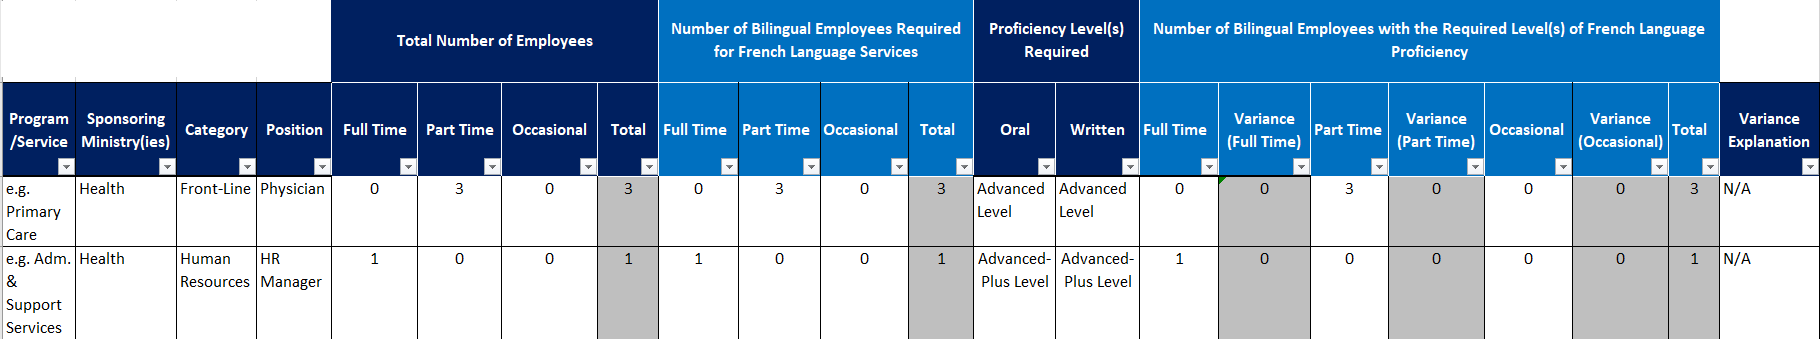 Screen capture of a table titled HR Plan, which lists the following data: program/service; sponsoring ministry(ies); category; position; total number of Employees: full-time, part-time, occasional, total; number of bilingual employees required for French Language Services: full-time, part-time, occasional; proficiency level(s) required: oral, written; number of bilingual employees with the required level(s) of French language proficiency: full-time, variance (full-time), part-time, variance (part-time), occasional, variance (occasional), total; variance explanation. Two positions are listed in the table as examples. The first is a Physician position, under a service titled Primary Care, and a category titled Front-Line, with a total of 3 part-time employees, all of which having the required Advanced level of French language proficiency. The second is a HR Manager position, under a service titled Administrative & Support Services, and a category titled Human Resources, with a total of 1 full-time employee, all of which having the required Advanced- Plus level of French language proficiency. No variance explanations are necessary for either position, since the required number of positions match the total number of positions and the required proficiency levels are met.